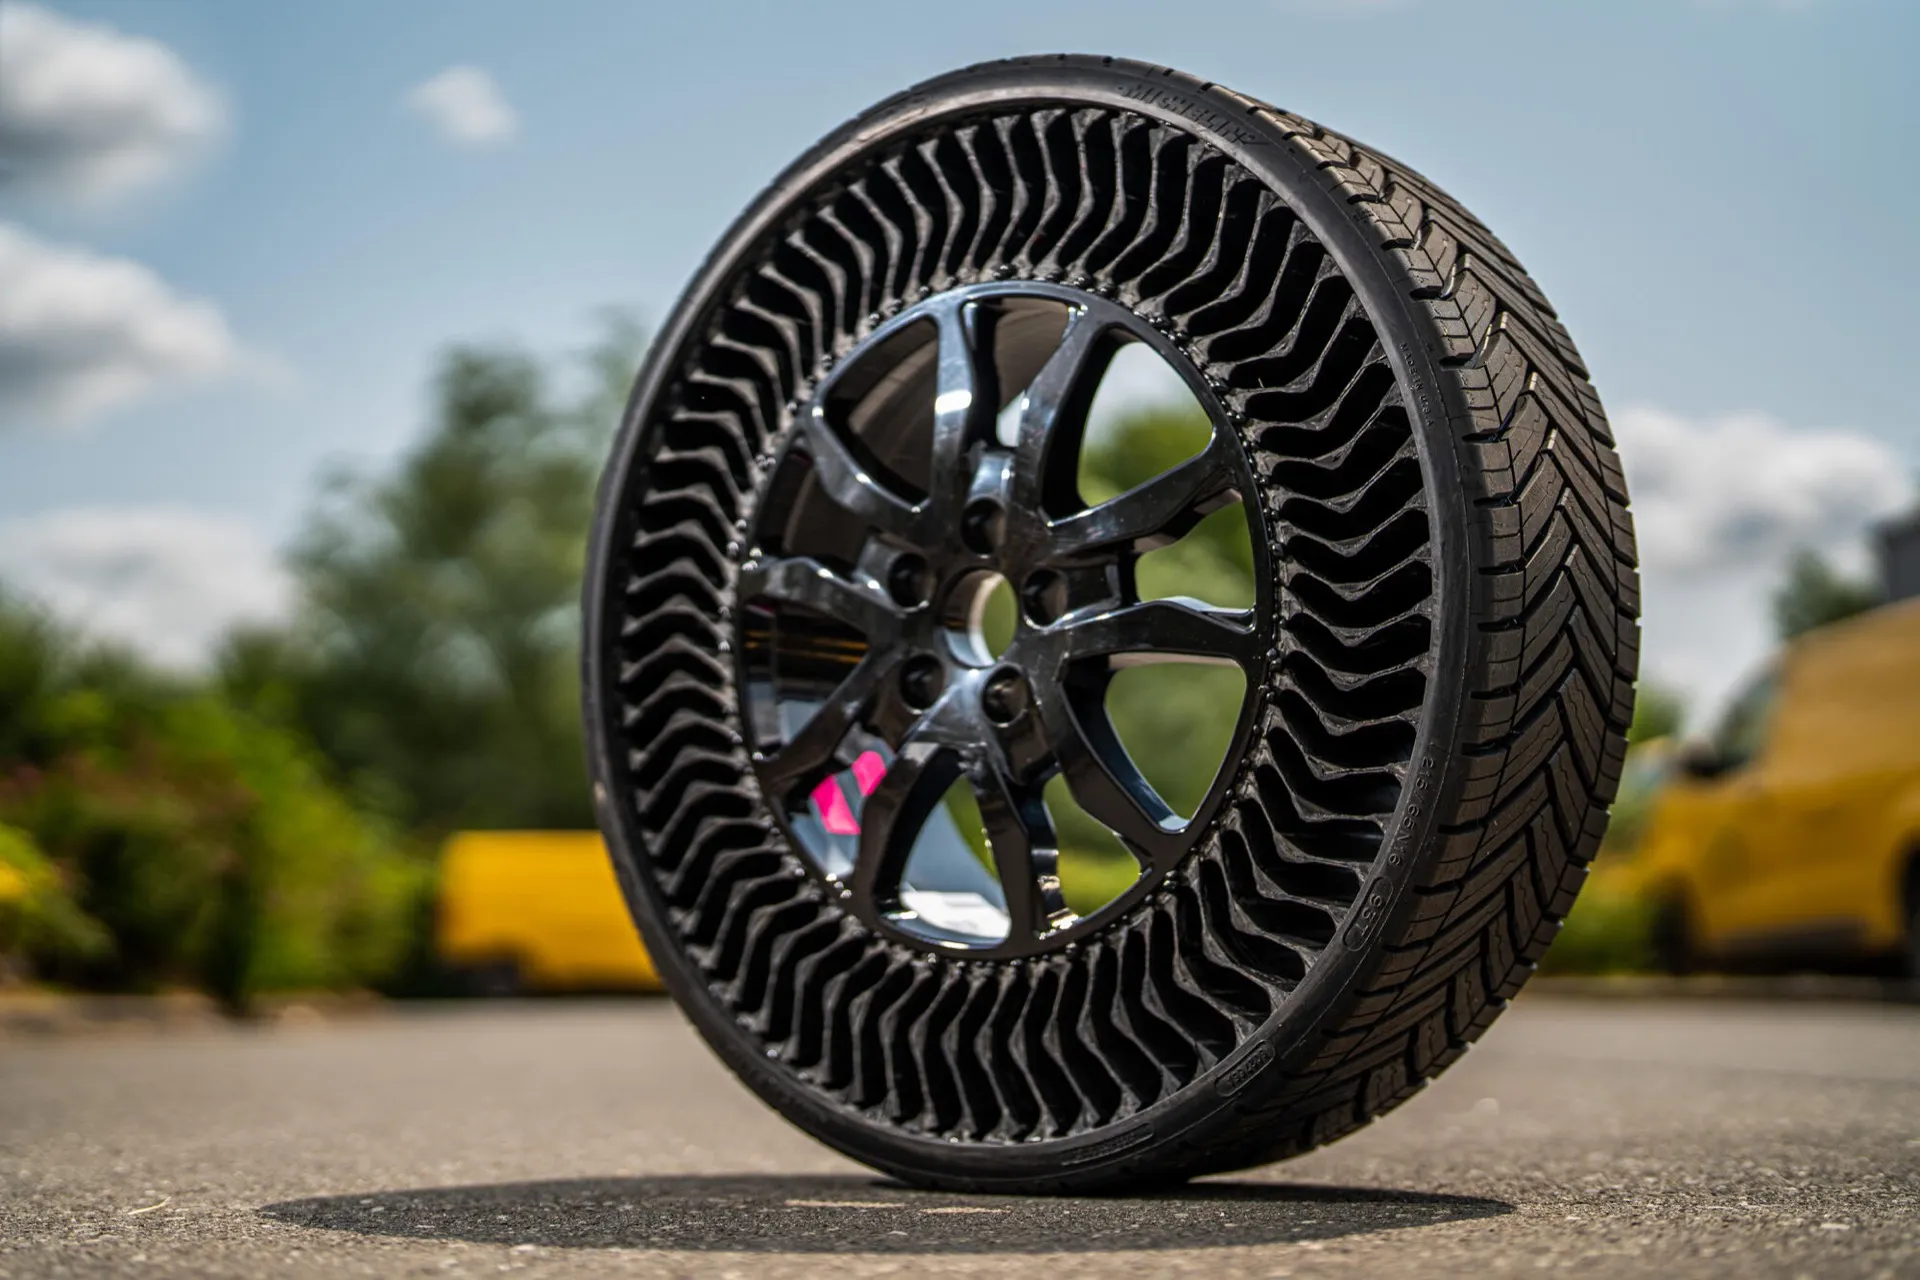 Airless tires look like the future for robotaxis, EVs, and more